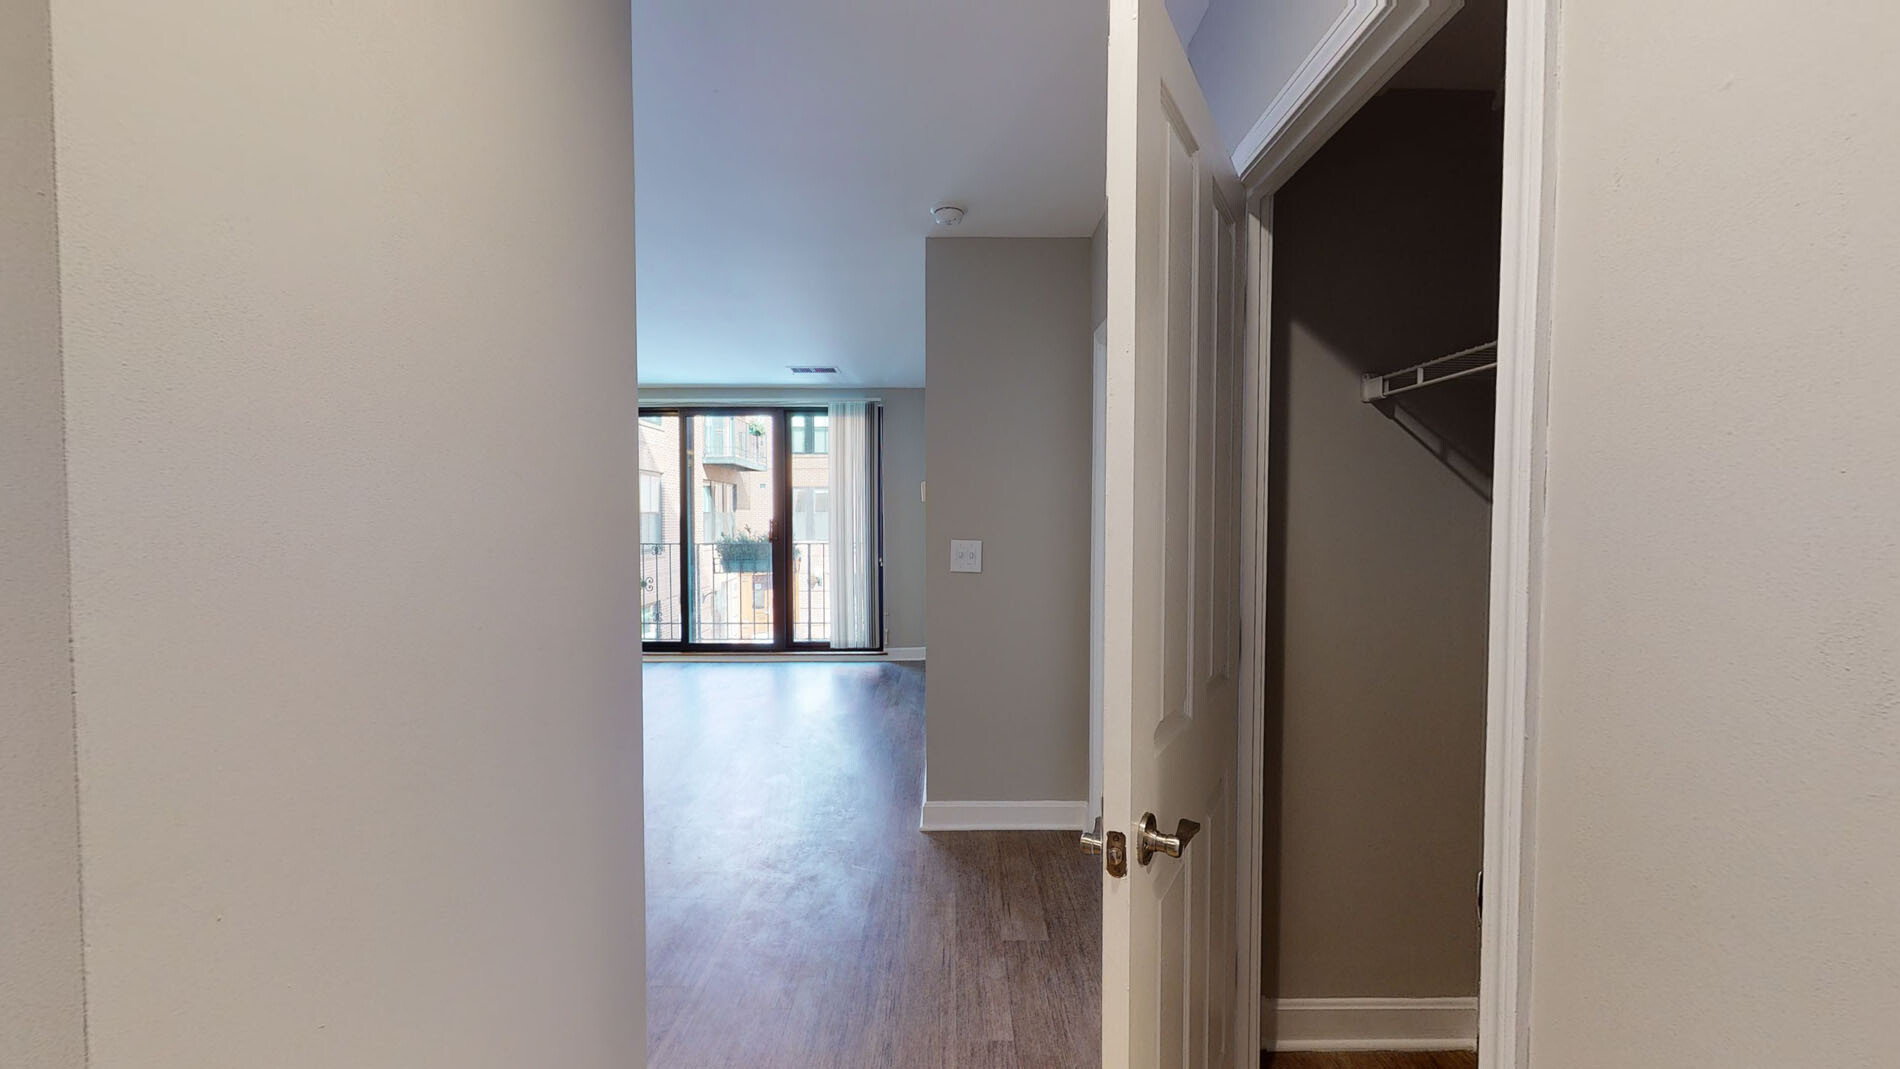 Pictures of  property for rent on Harcourt St., Boston, MA 02116